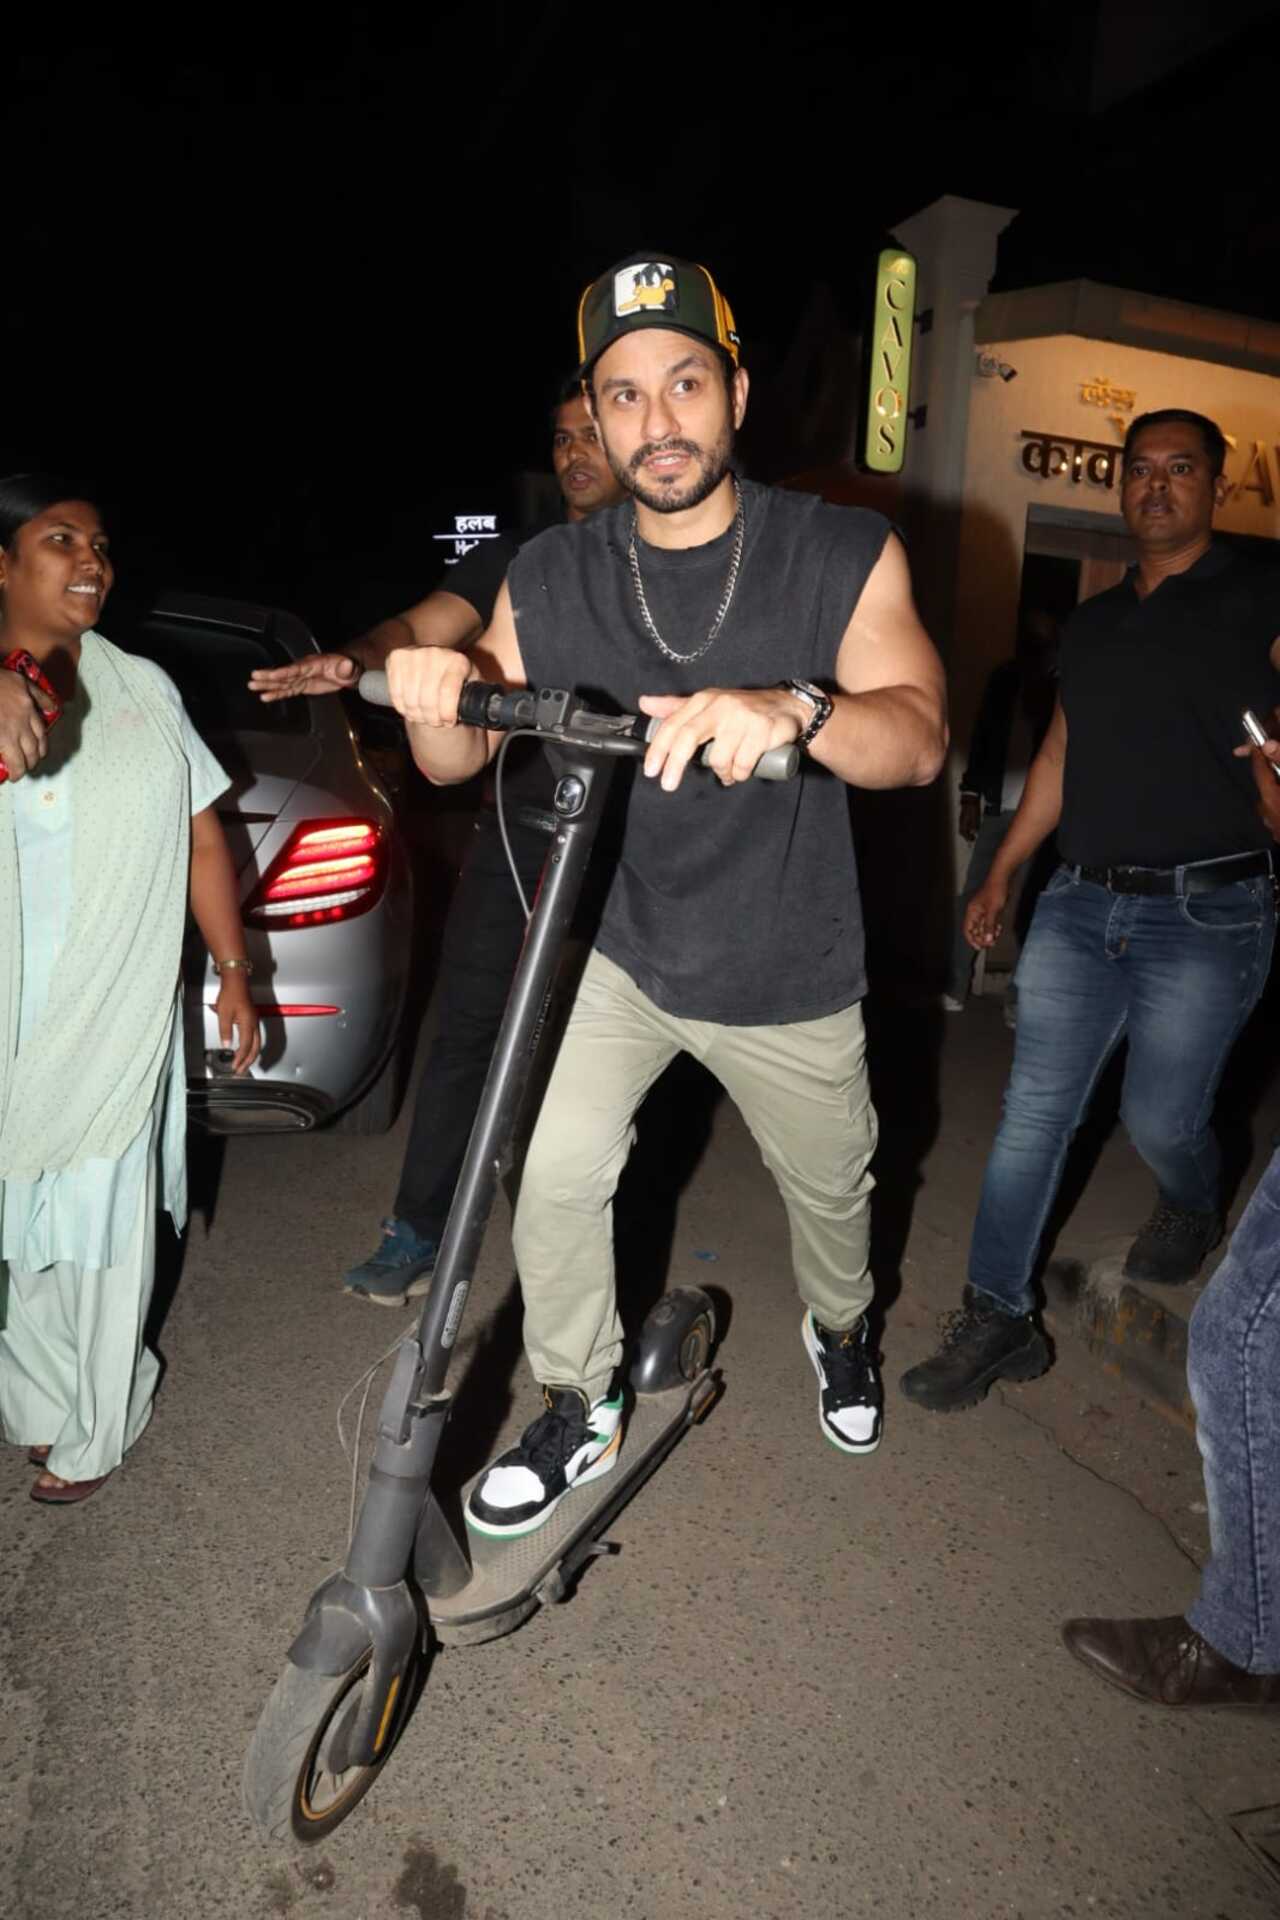 Kunal Kemmu who co-starred with Vir in Go Goa Gone arrived in a scooter to the party